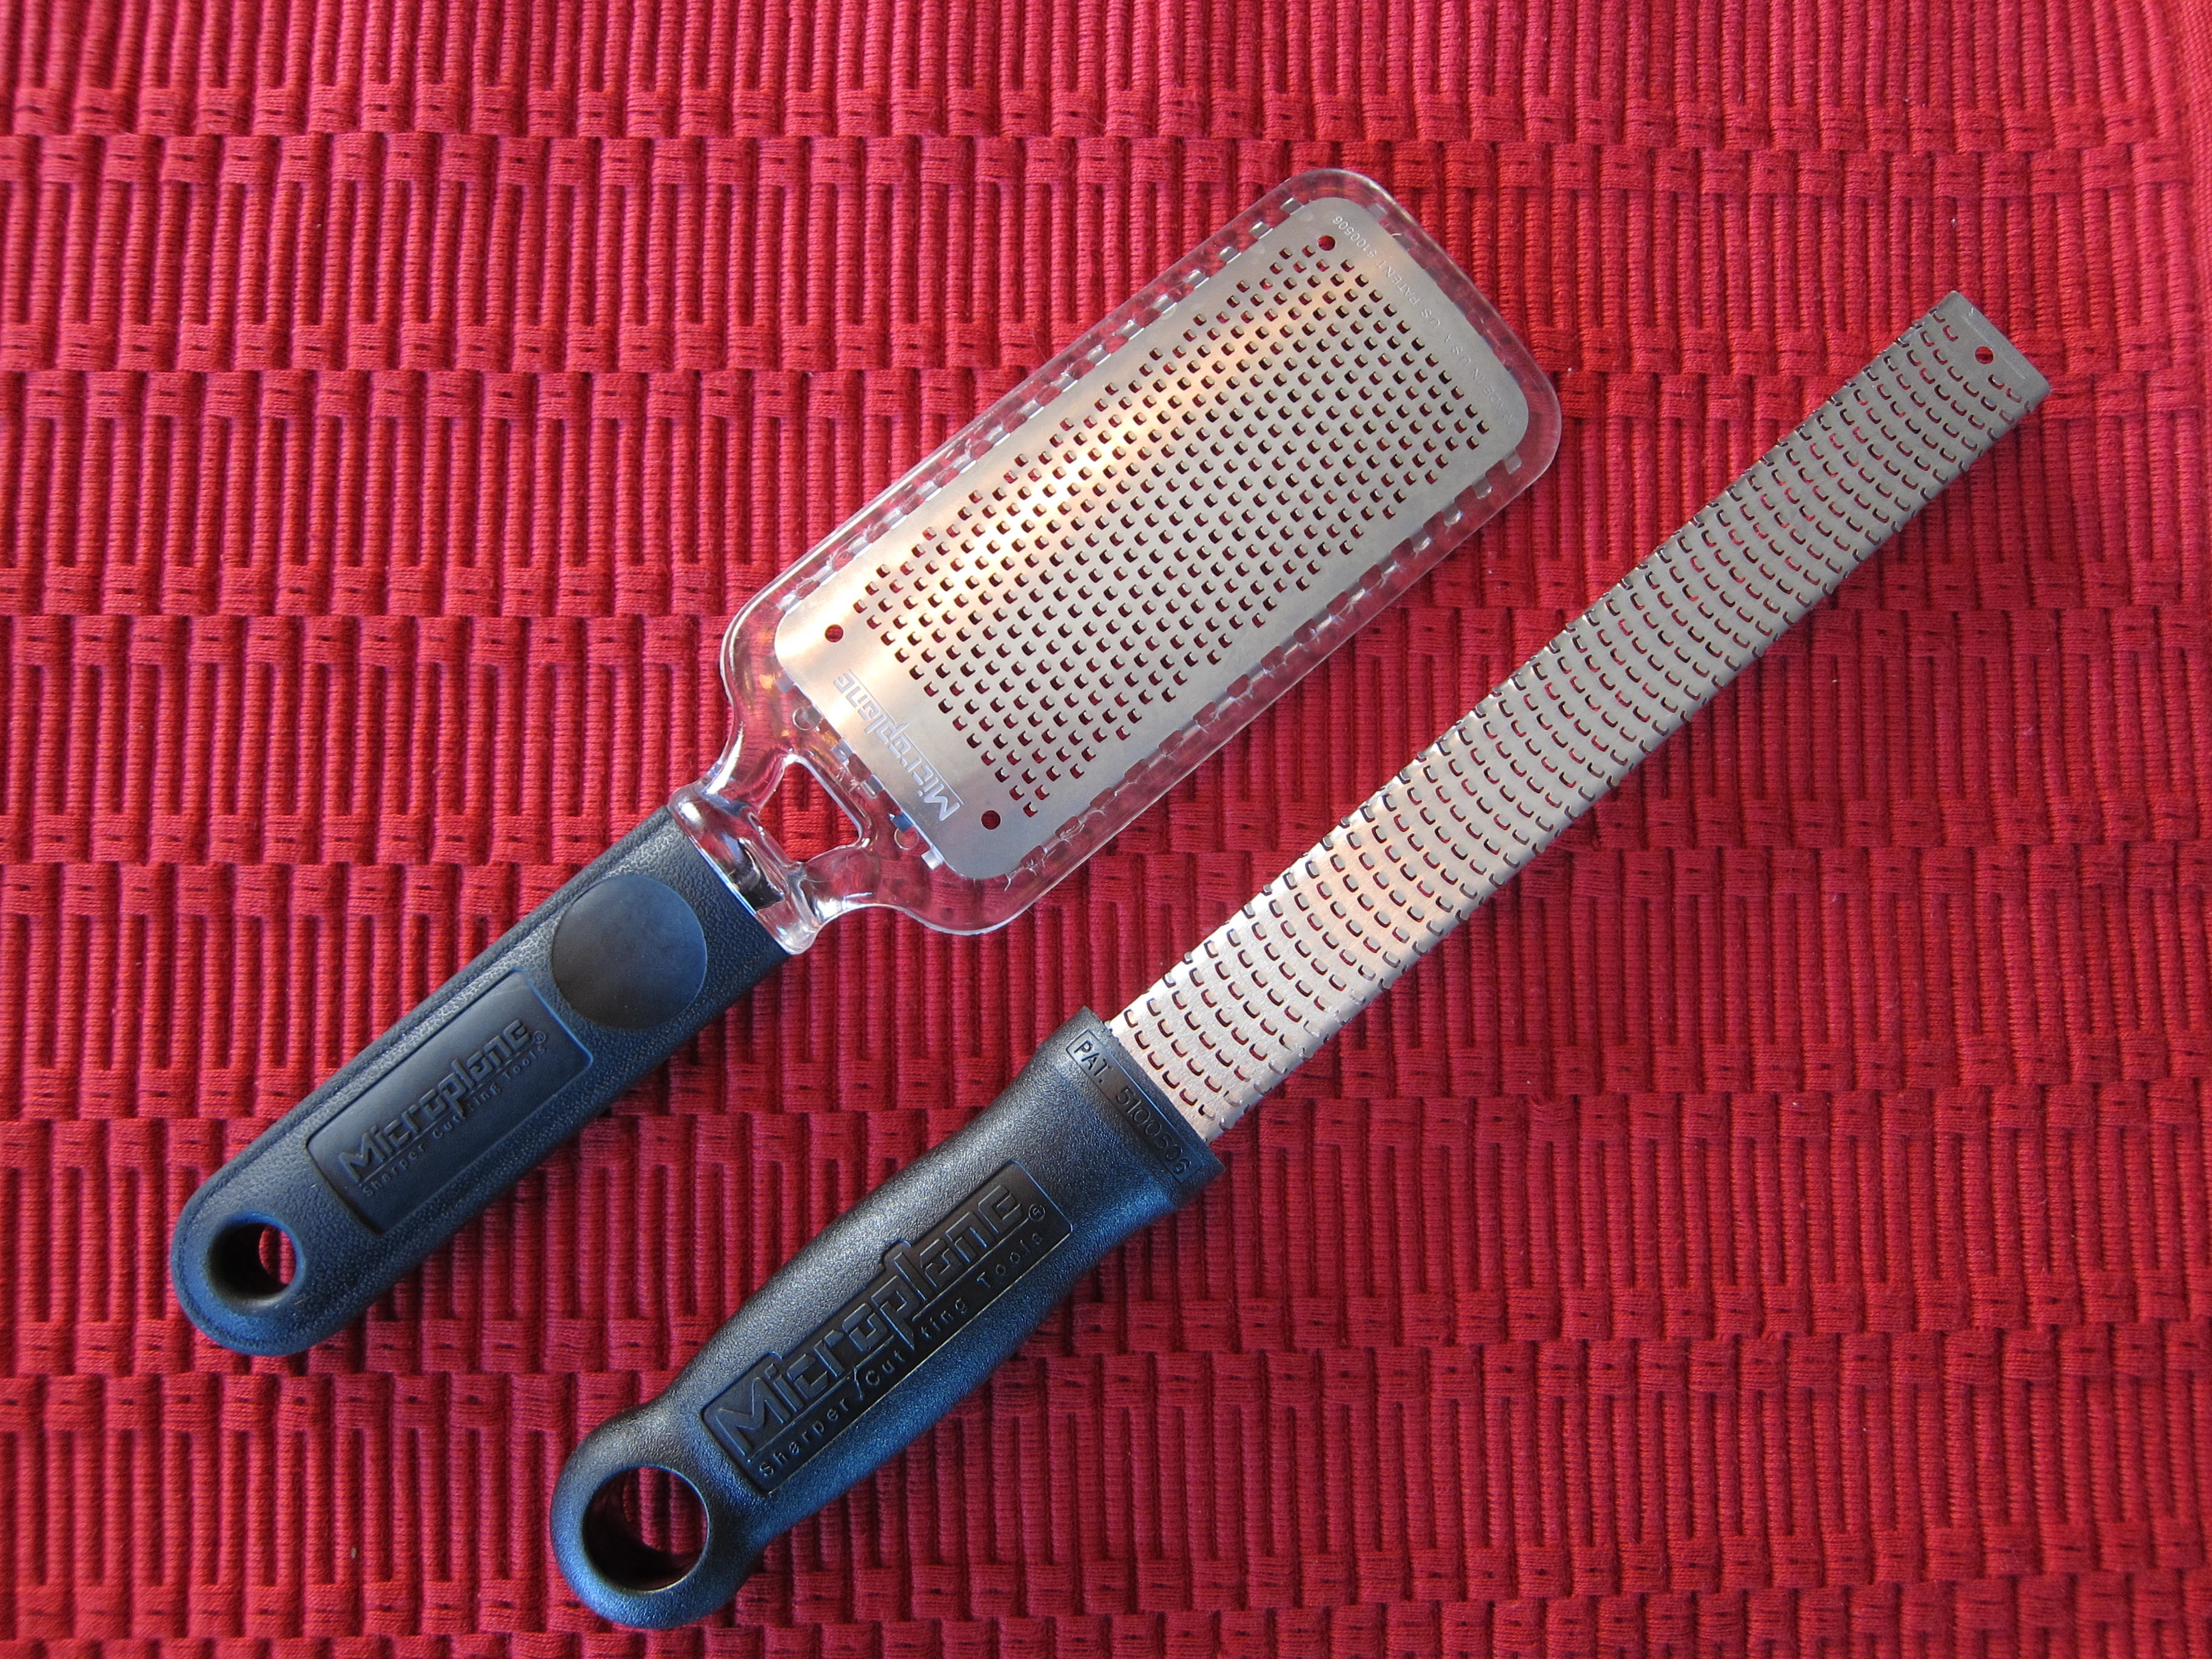 How to Use a Microplane Grater